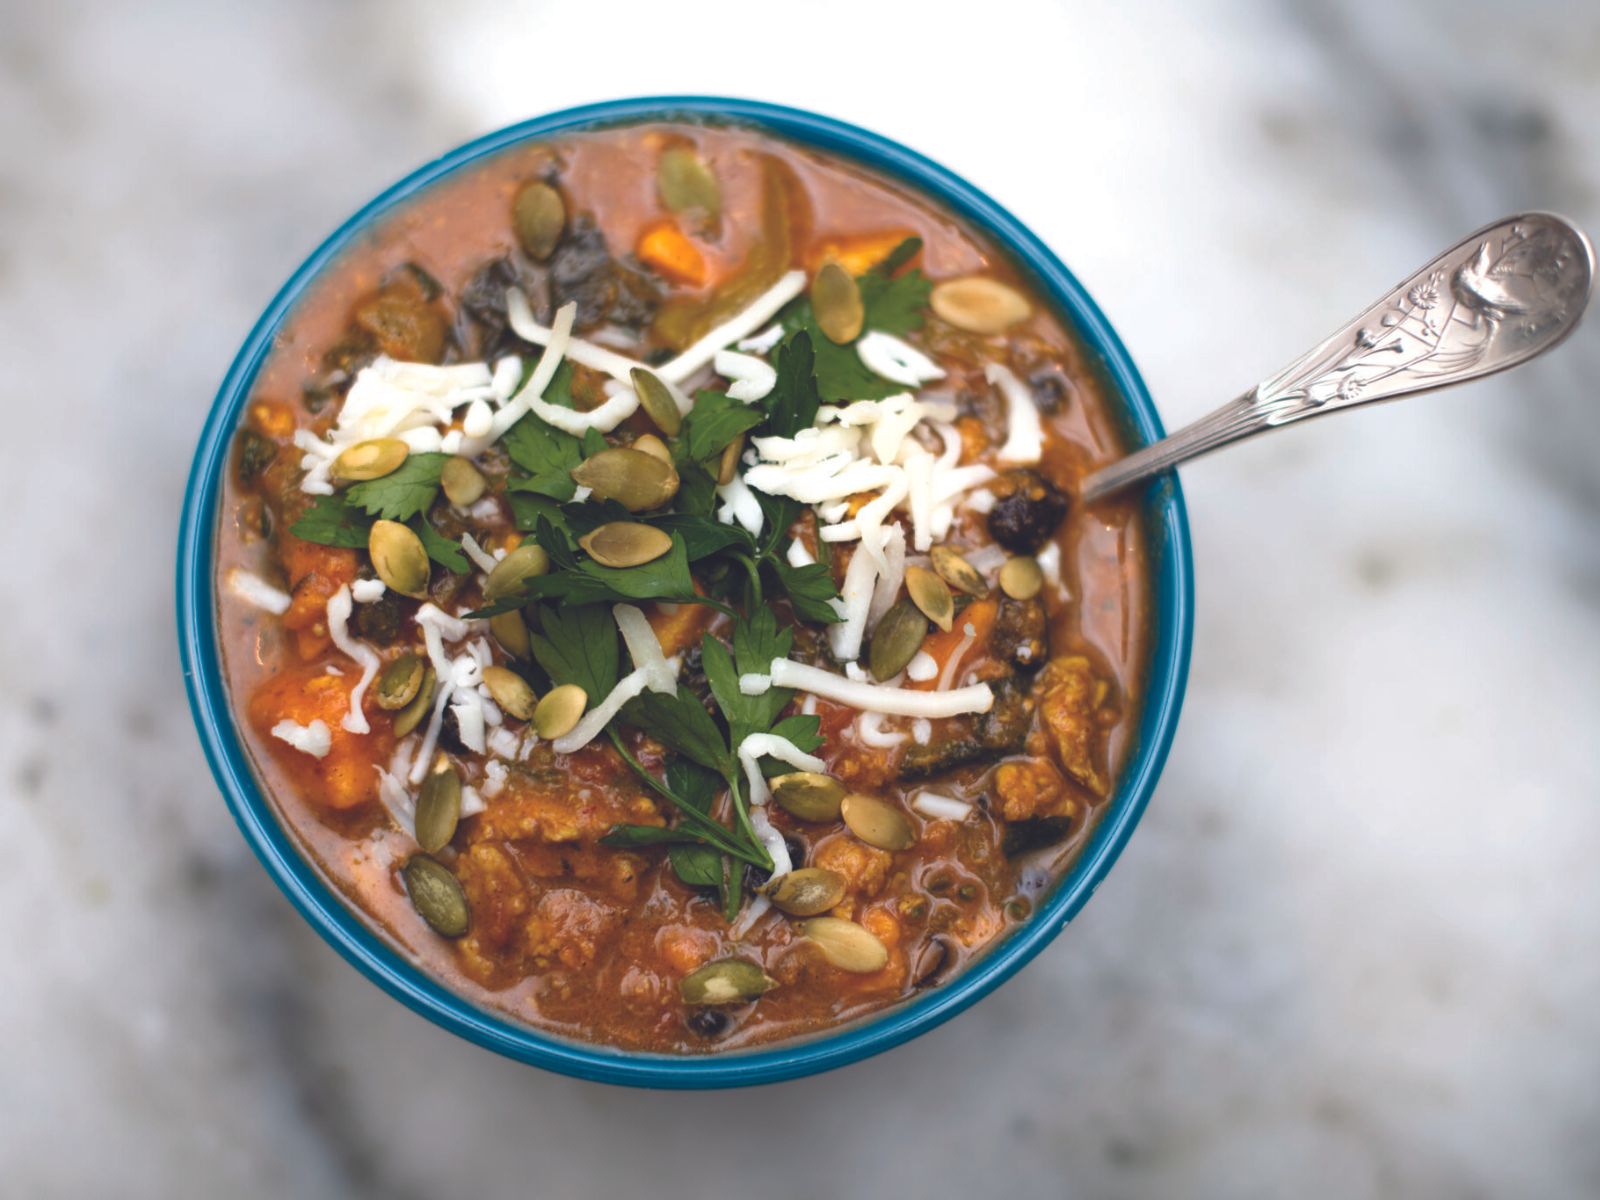 6 Turkey Chili Recipes to Mix Up Your One-Pot Meals